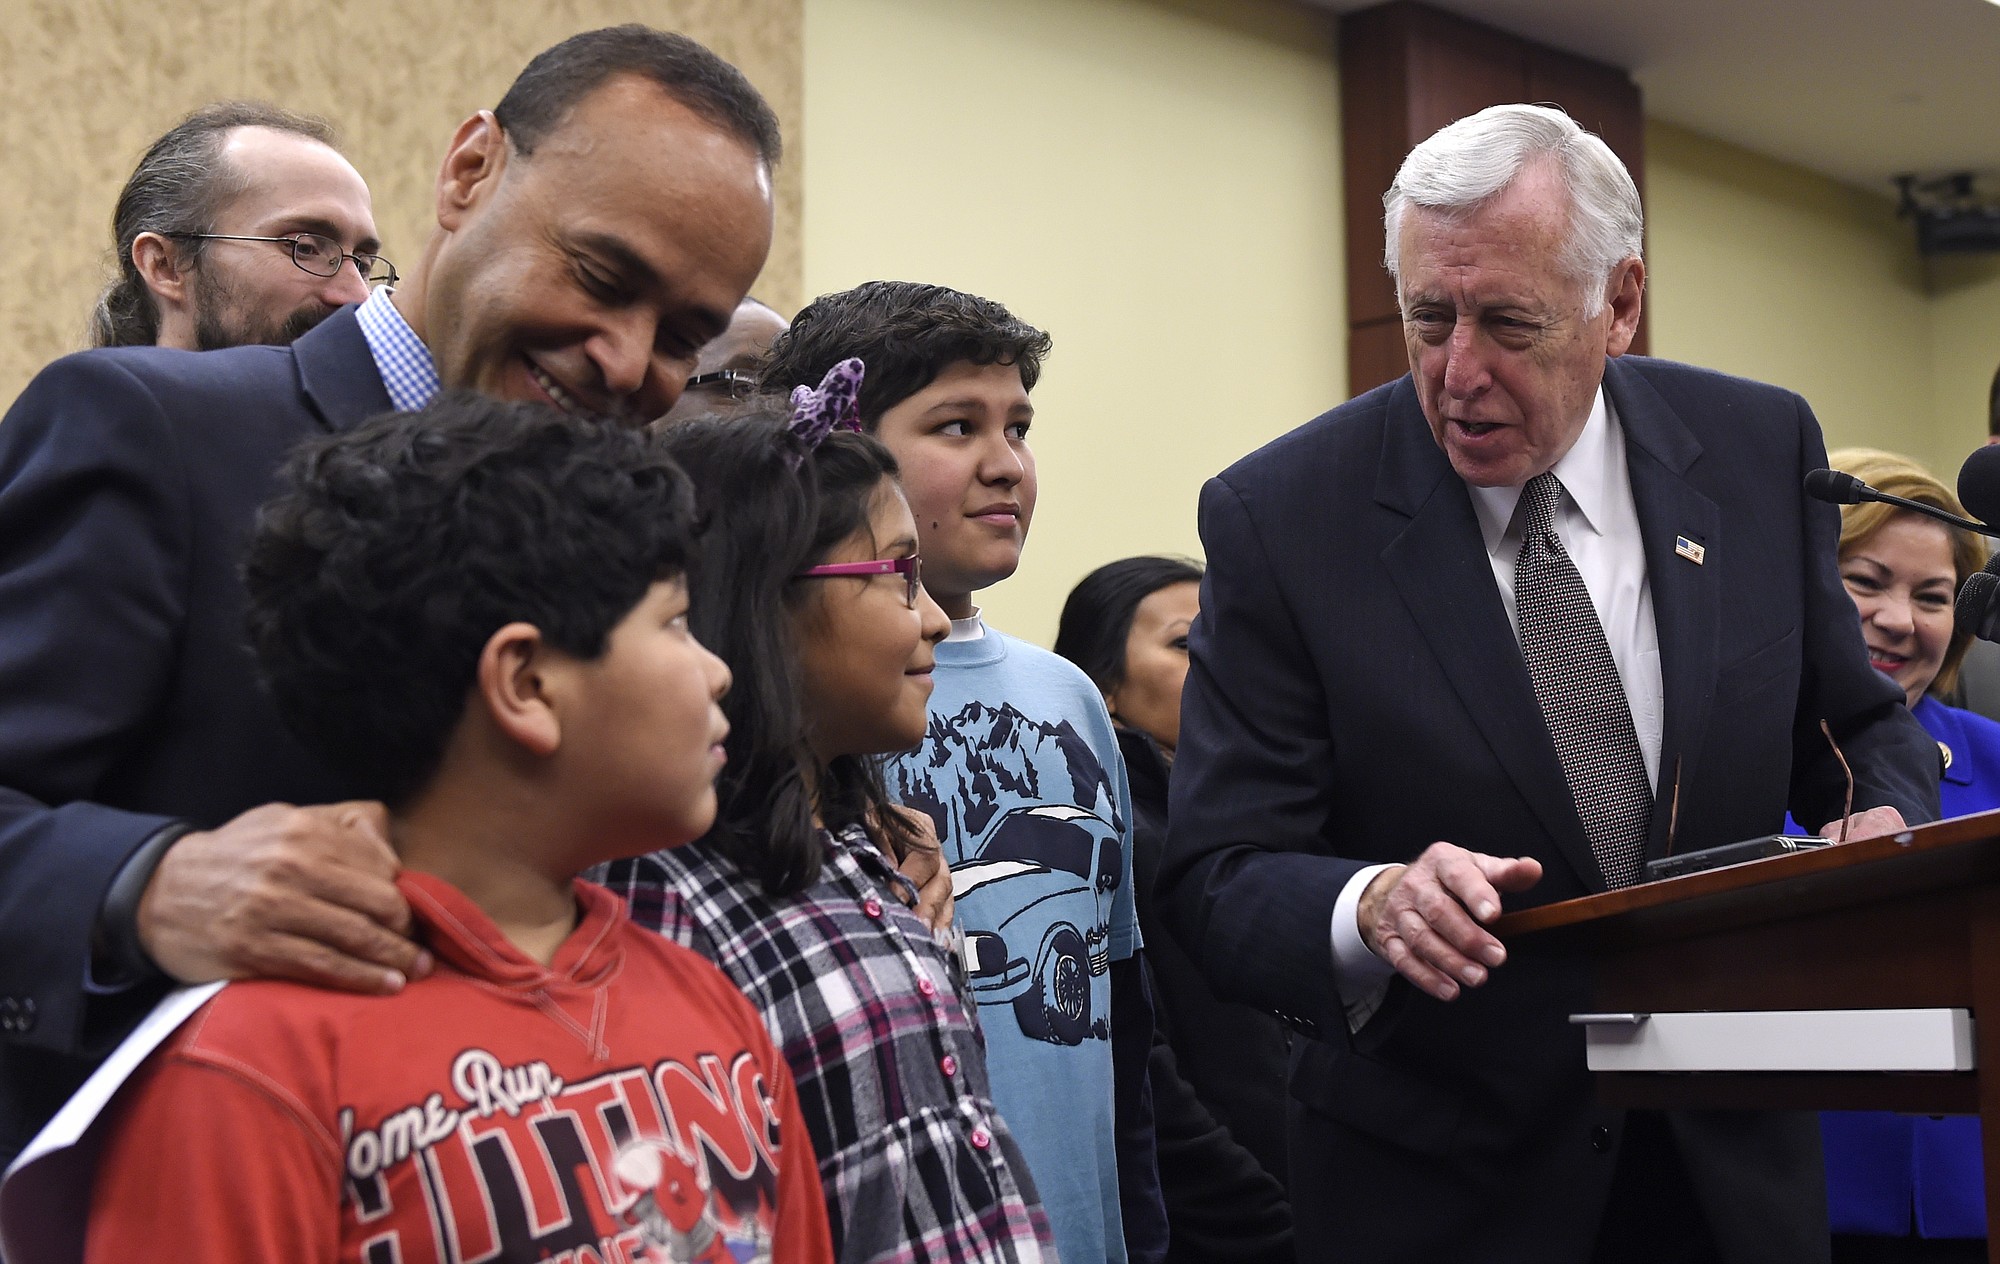 House Minority Whip Steny Hoyer of Md., right, talks to Adolofo Martinez, 13, center, Miranda Martinez, 8, and Emilio Martinez, 7, as Rep. Luis V. Gutierrez, D-Ill., listens, before the start of a news conference on Capitol Hill in Washington on Wednesday on the House Republican's immigration policies.